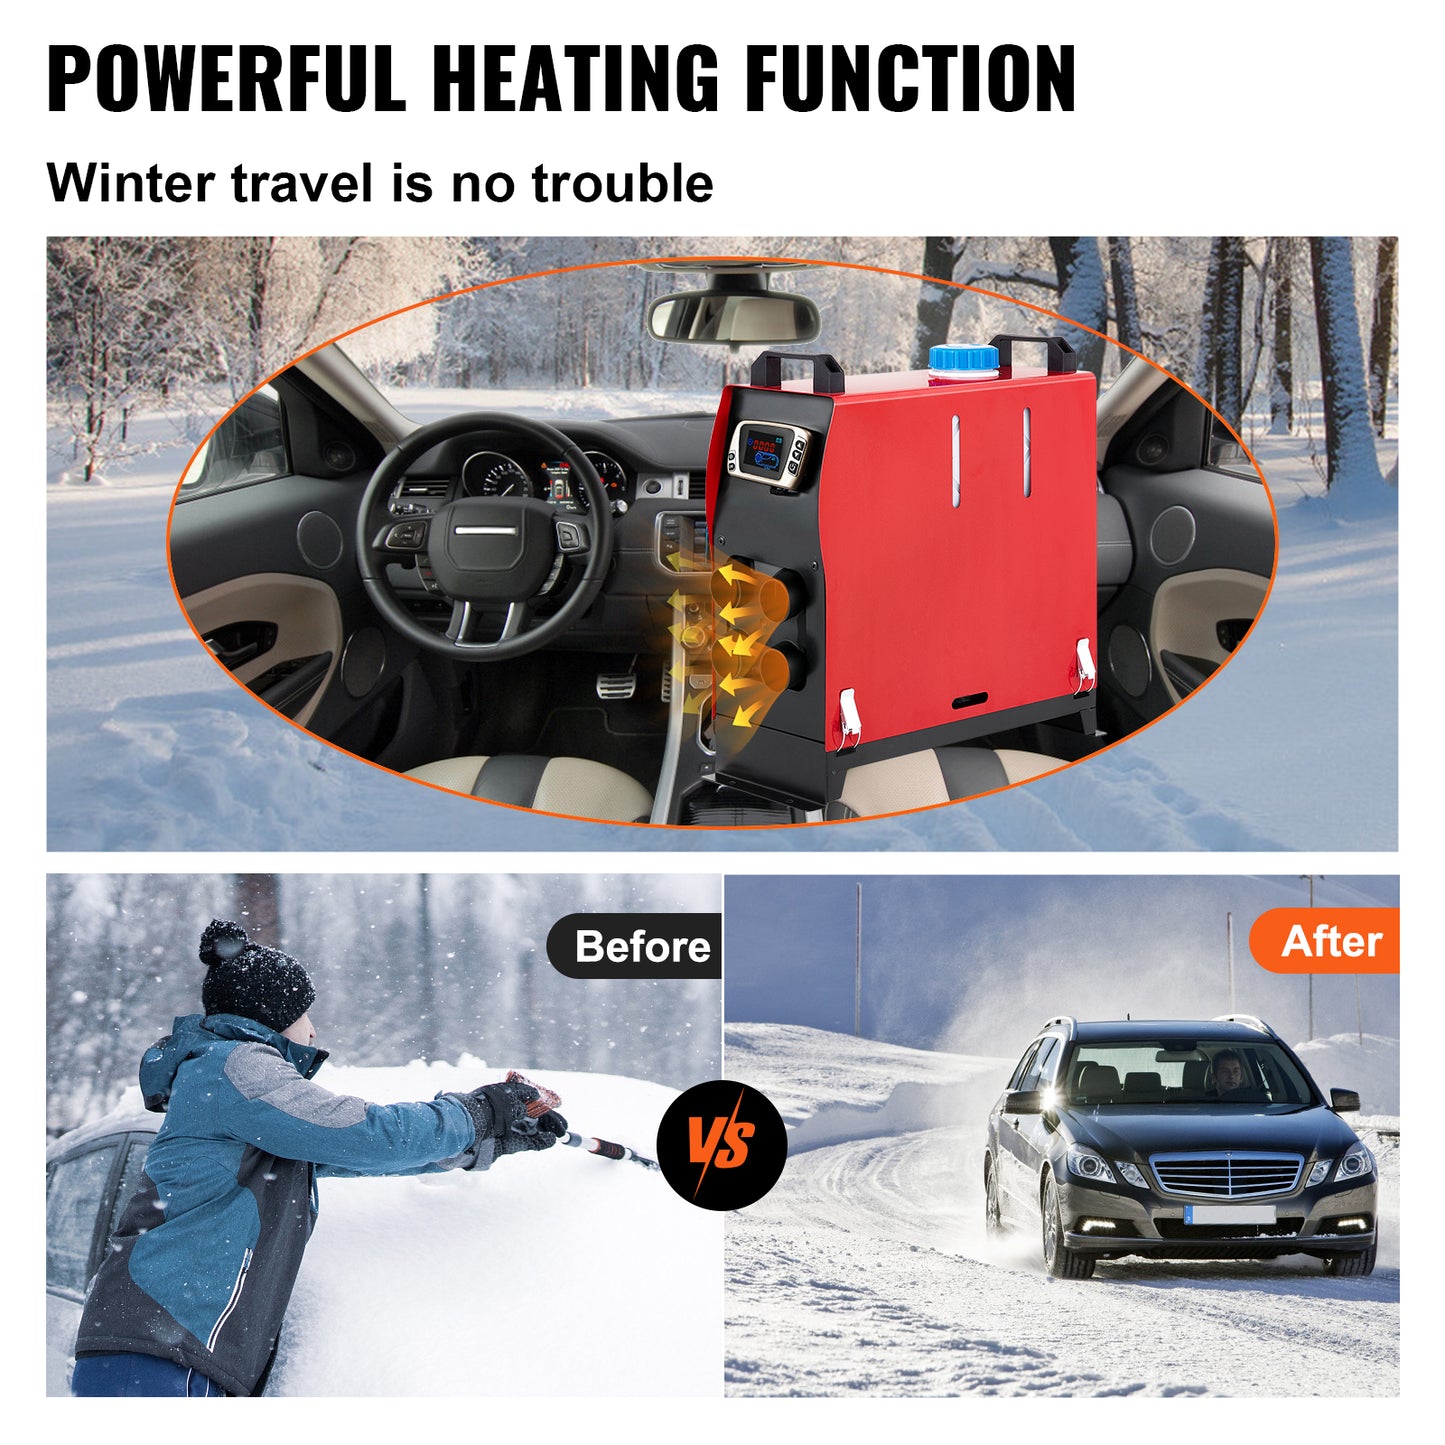 5KW All-In-One Diesel Parking Heater for Car/Truck/Boat - LCD, 12V, 4-Hole (Plateau Edition)